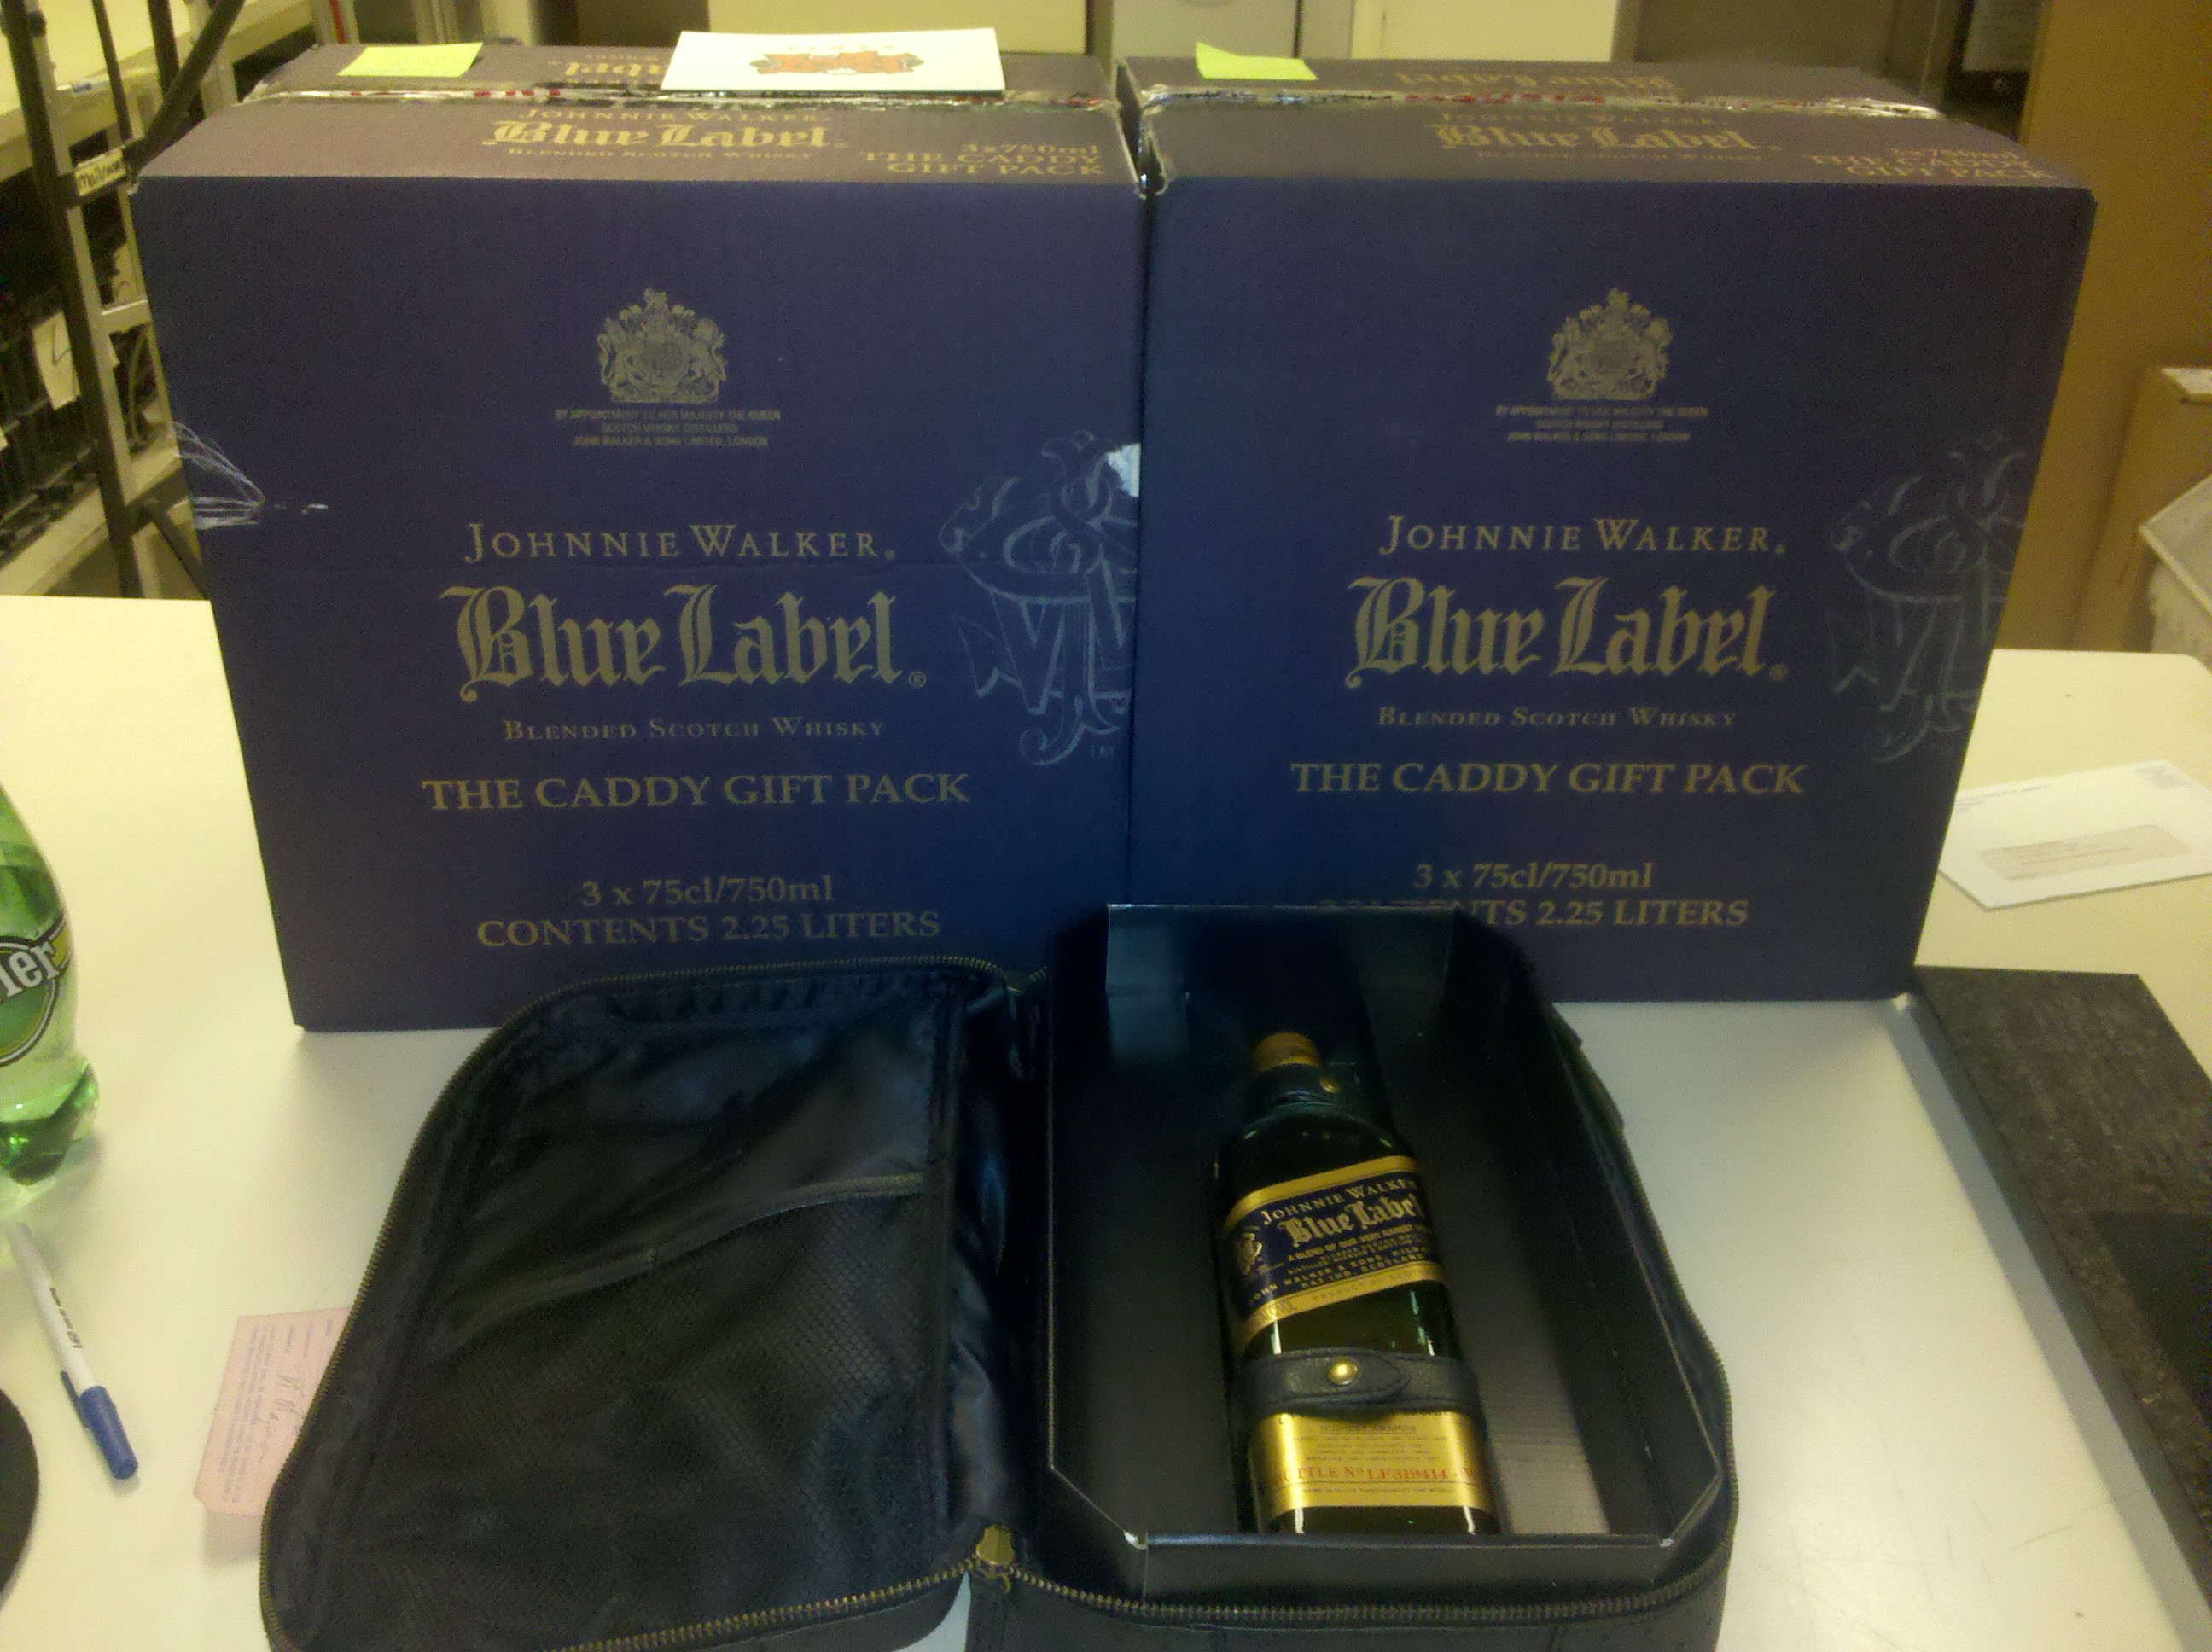 As a thank you, one of the attorneys I work for gets 2 cases of Johnny Walker Blue Label gift sets That's six 750ml bottles in leather carrying cases for me and 2 of my employees.